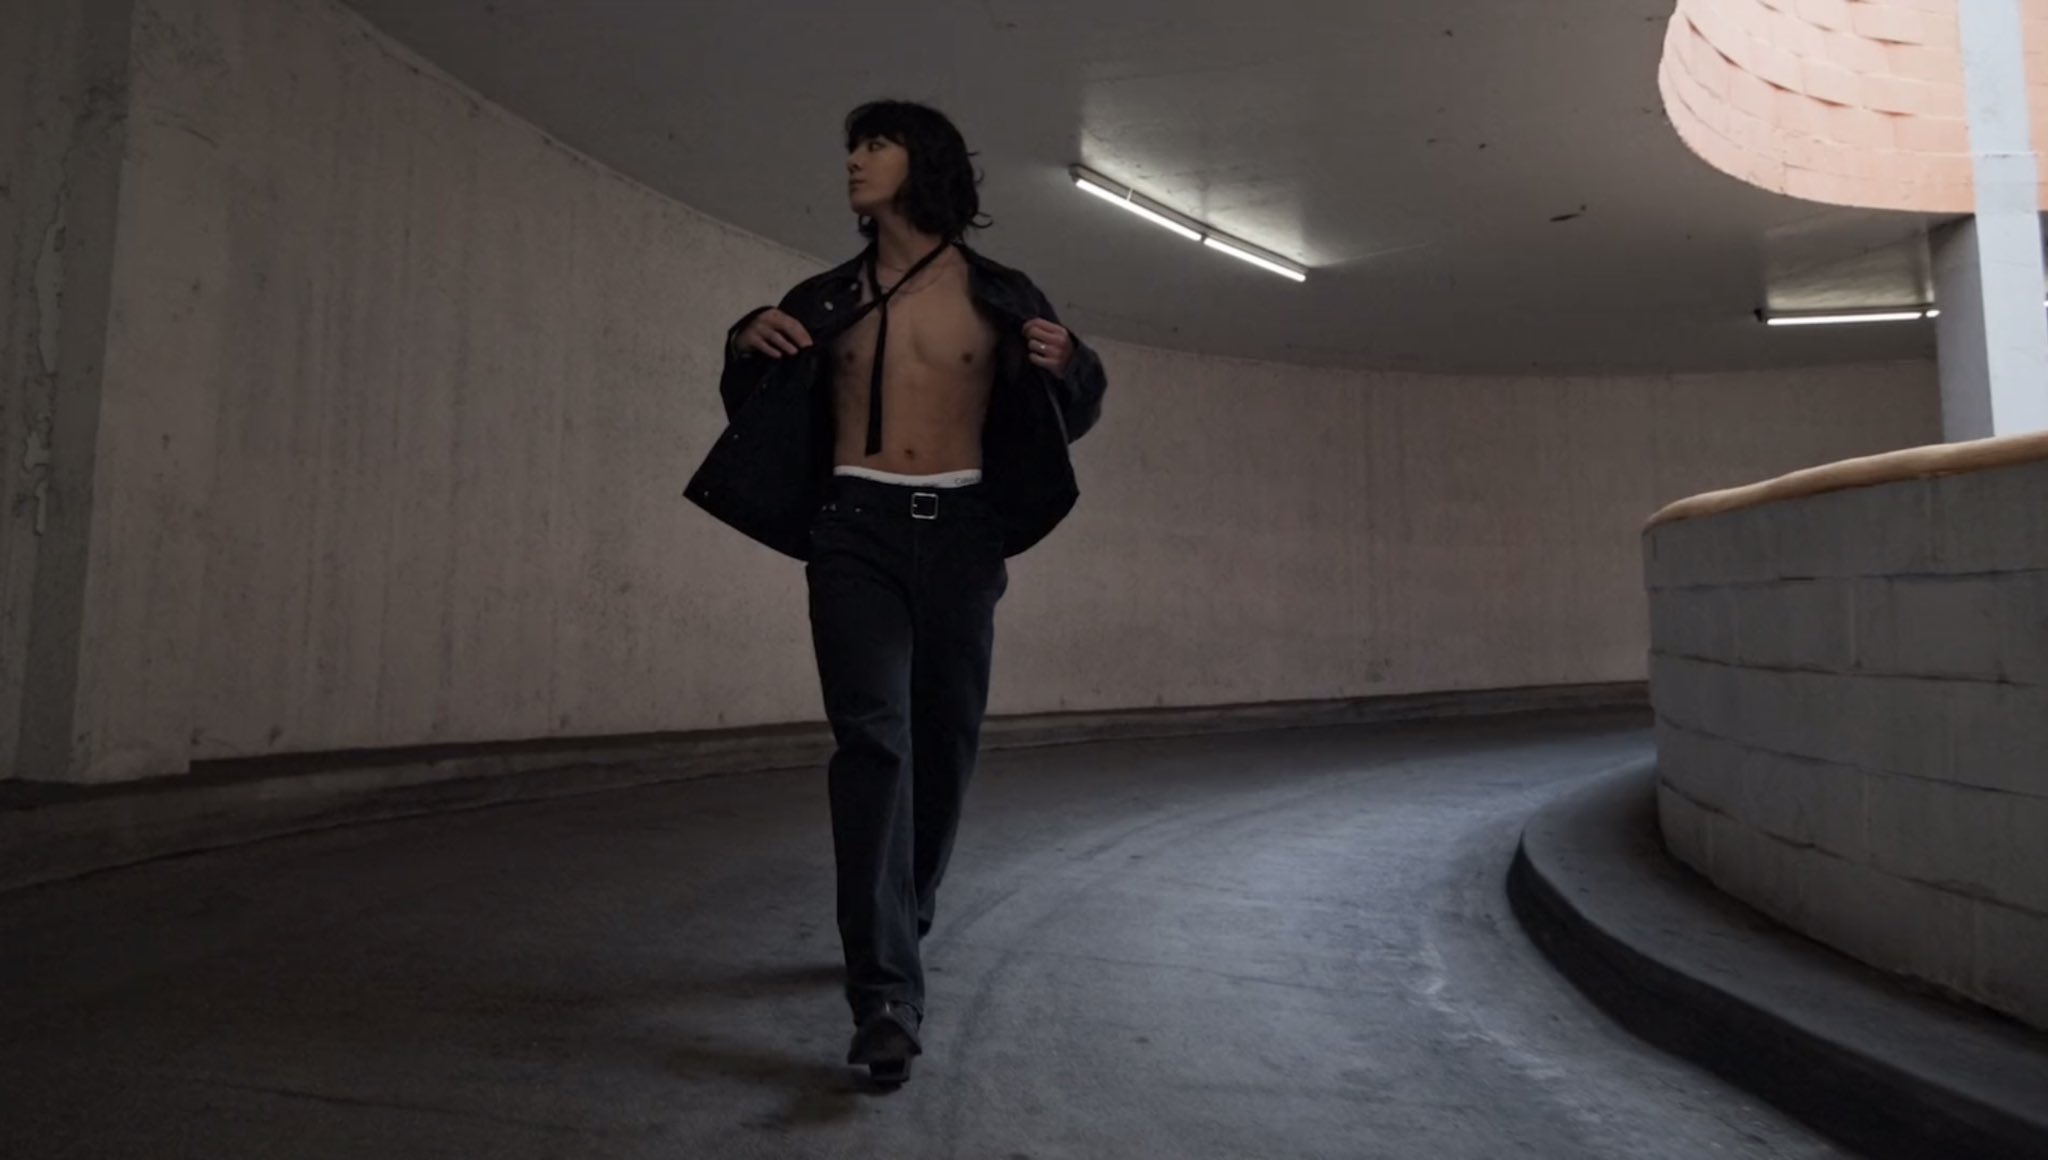 BTS Jung Kook Stars in Calvin Klein Fall Campaign: Exclusive Video